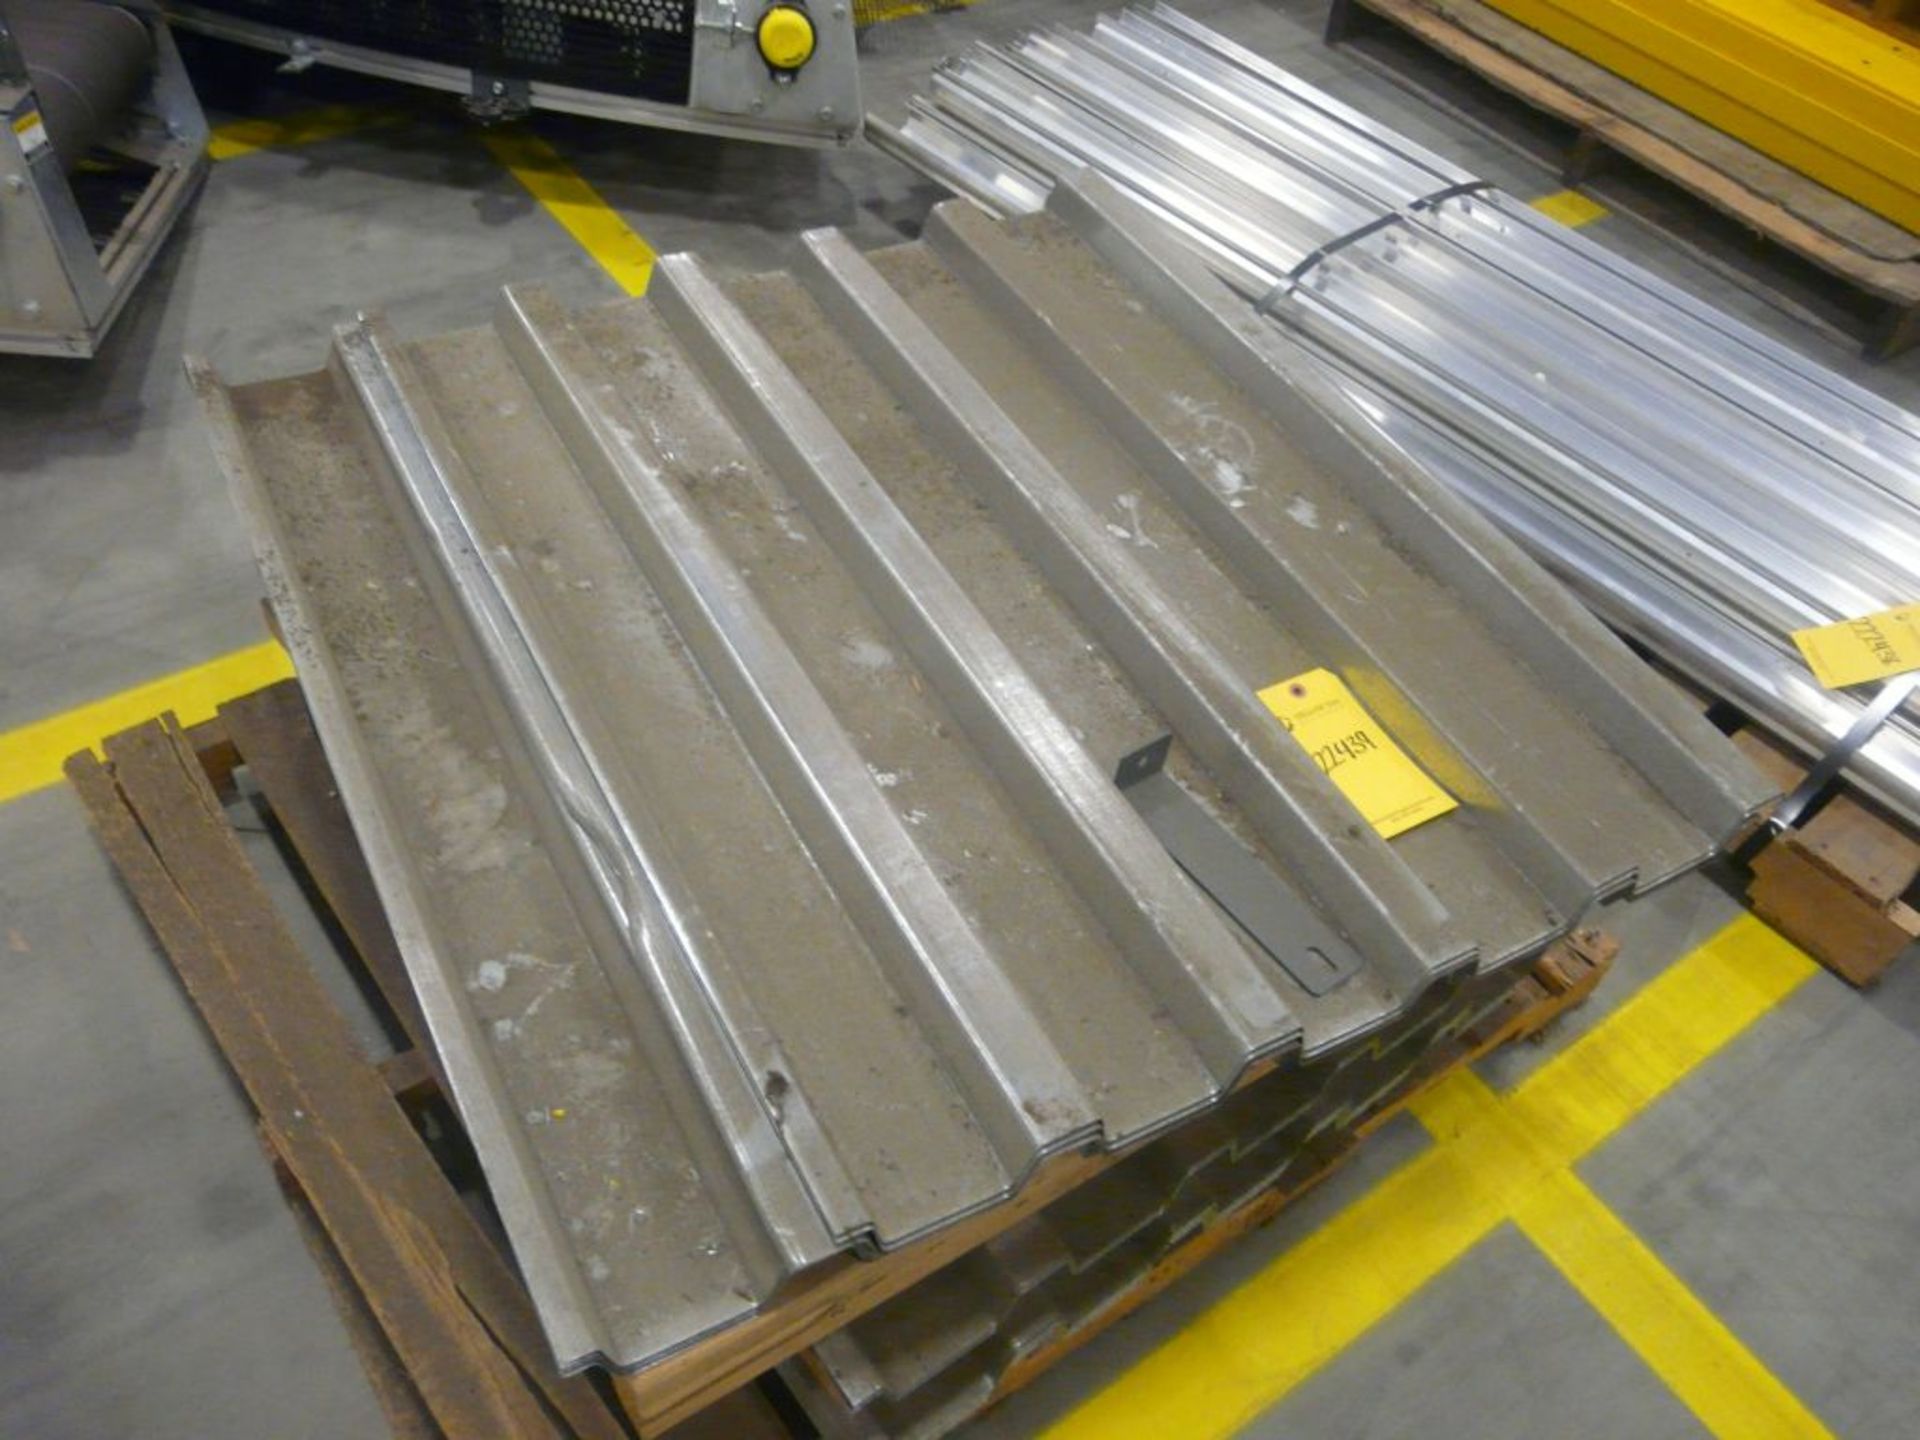 Lot of Metal Roofing - Tag: 222439; Lot Loading Fee: $30 - Image 3 of 4